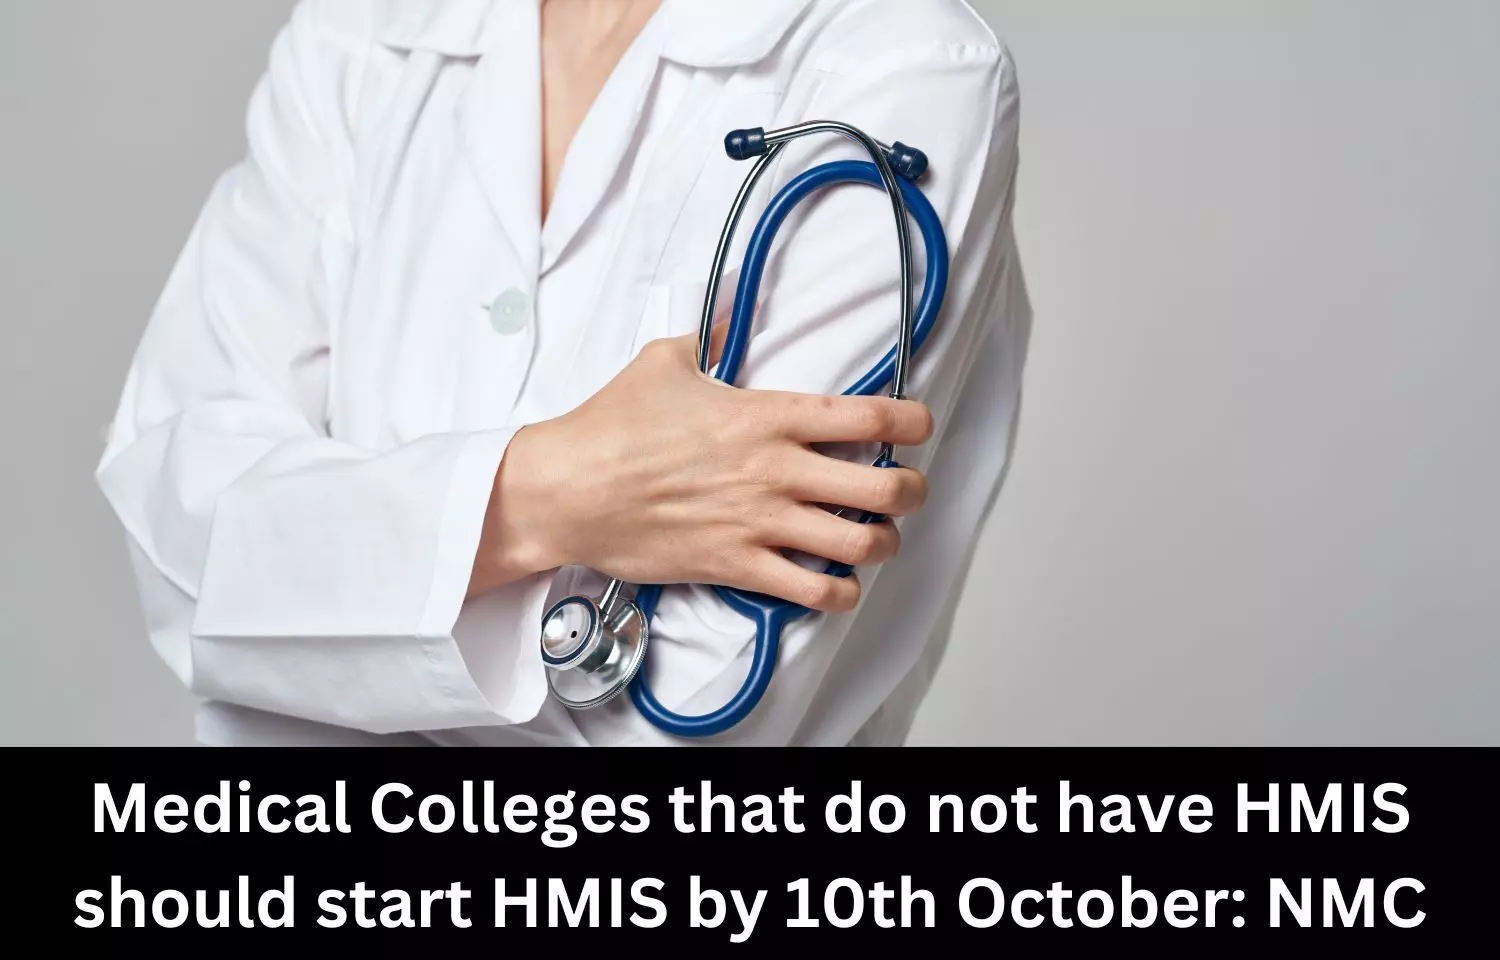 Medical colleges that do not have HMIS should start HMIS by 10th October: NMC